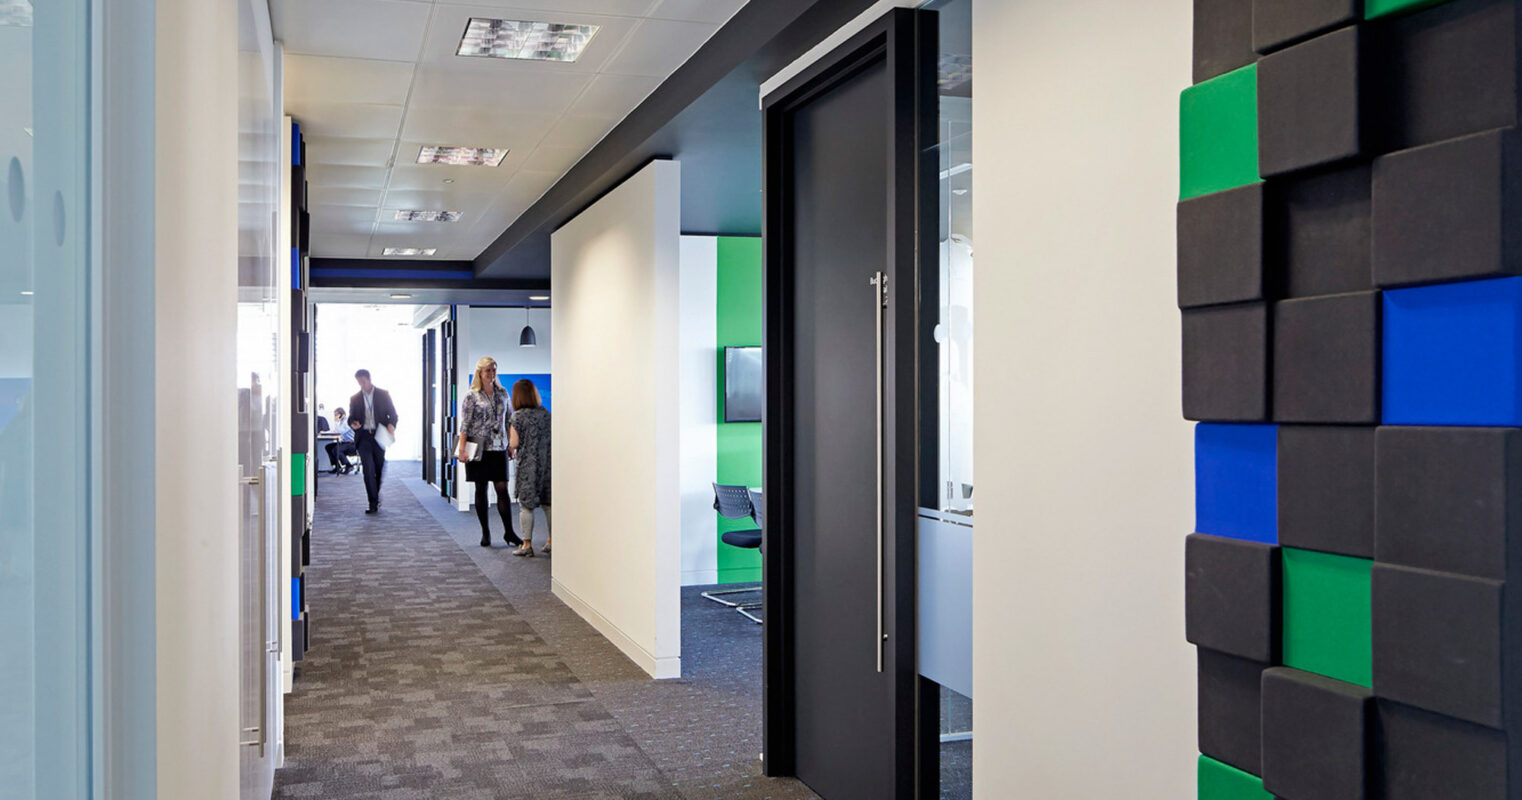 Modern office interior with a vibrant blend of white walls and black, blue, green acoustic panels. Sleek glass doors separate workspaces, while gray carpeted floors offer a neutral path. Contemporary lighting enhances the functional yet aesthetically pleasing business ambiance.